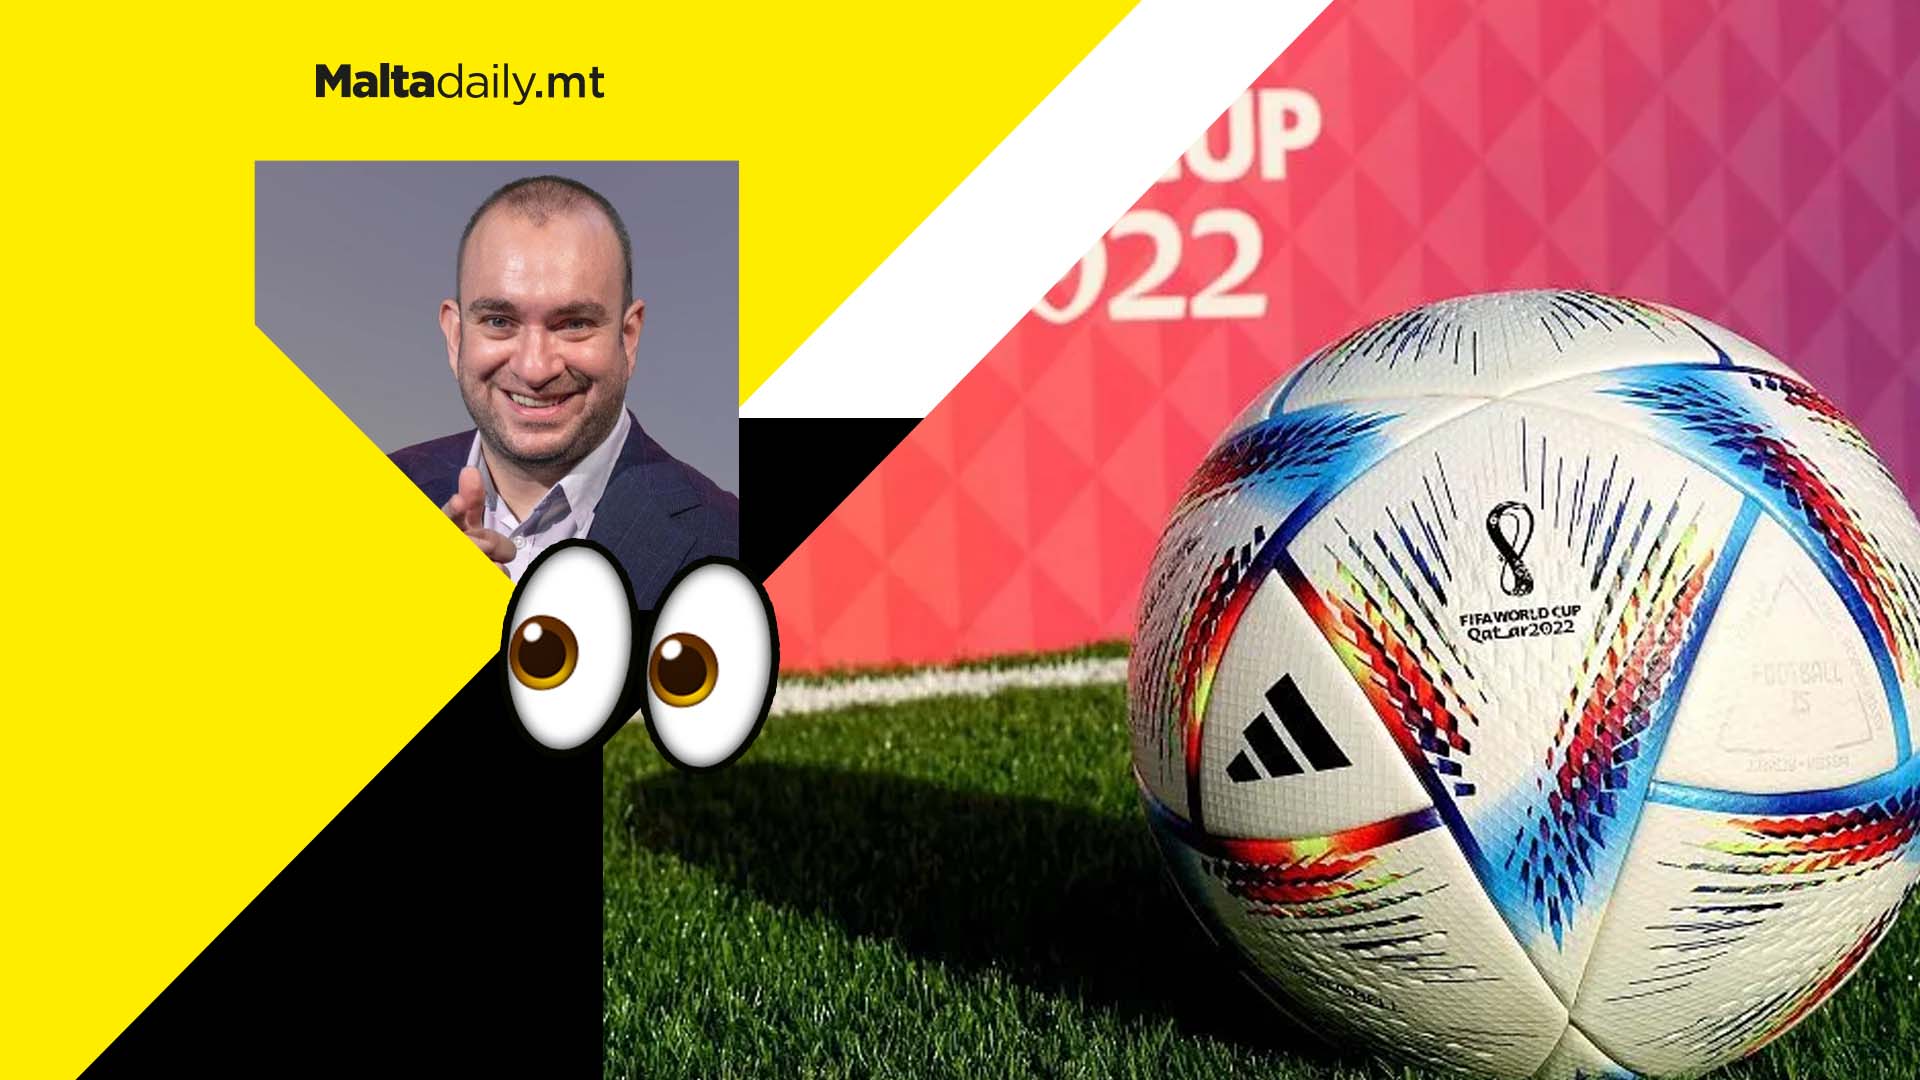 Maltese commentary should be provided for World Cup says local sports journalist